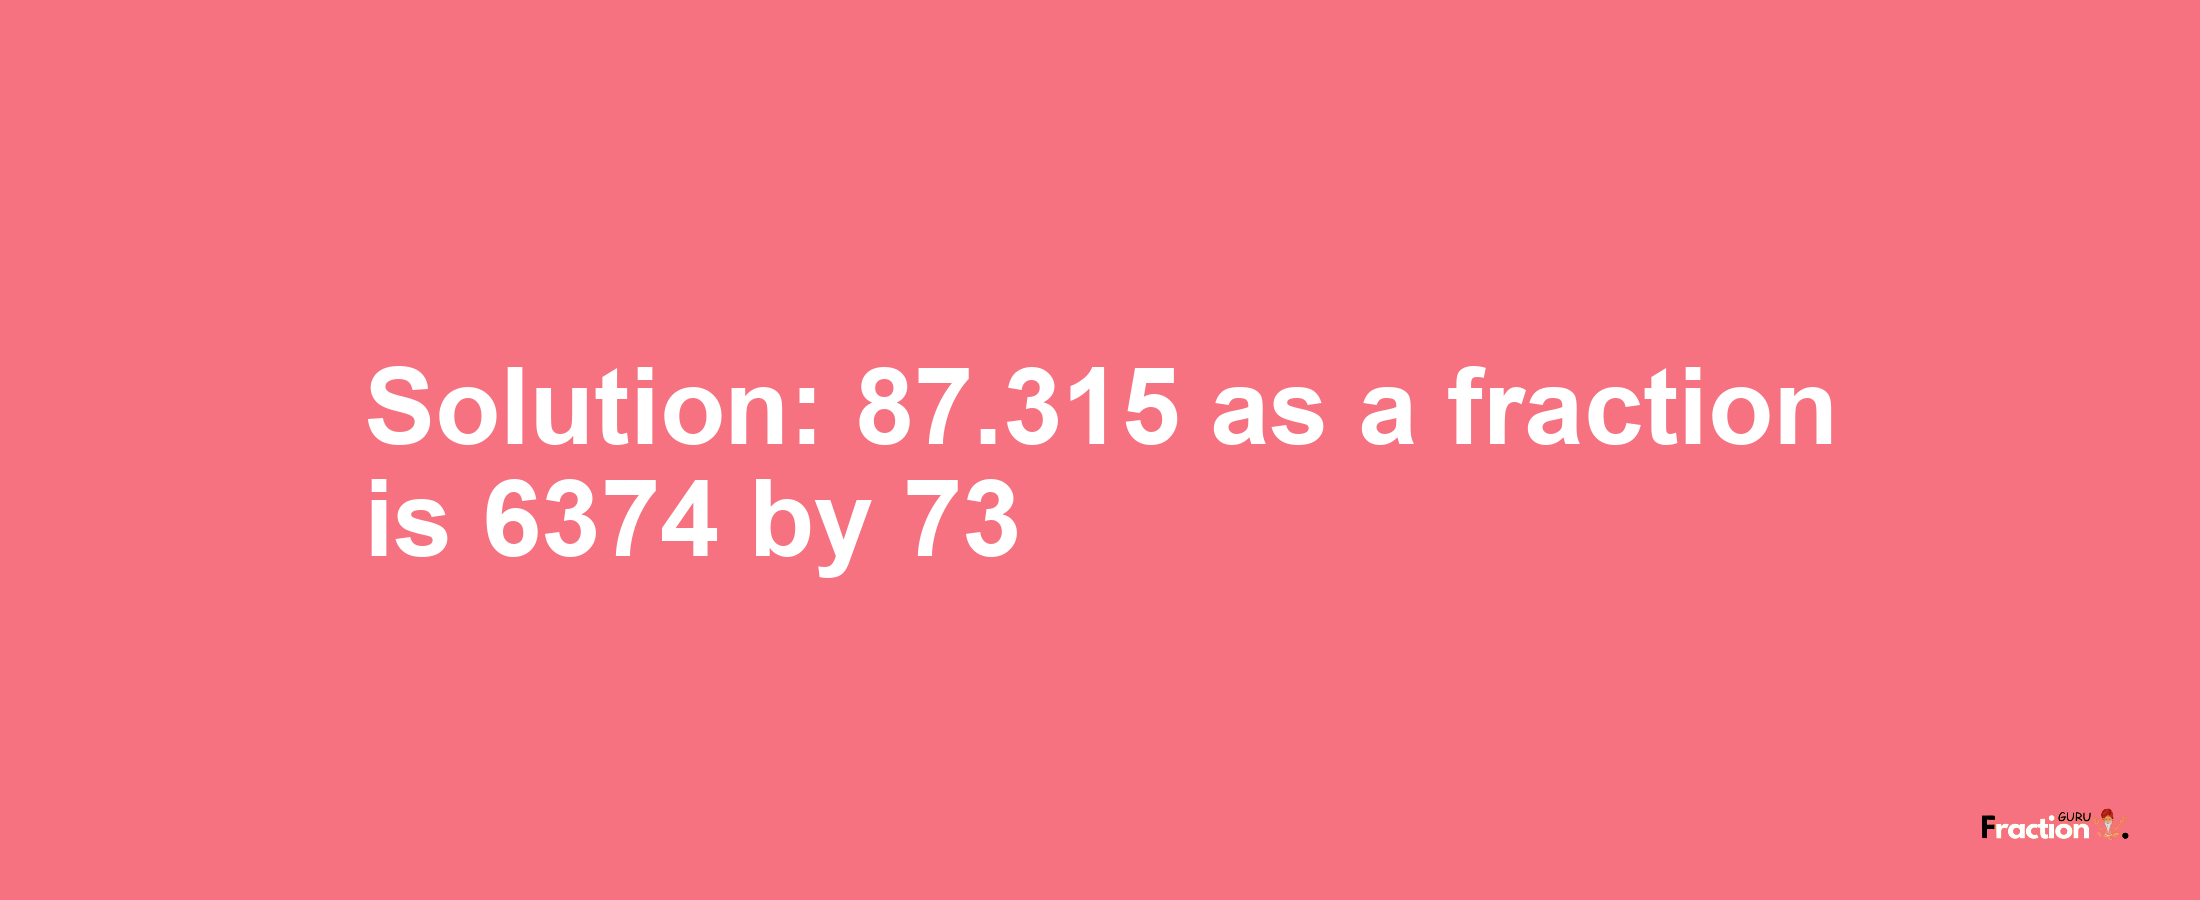 Solution:87.315 as a fraction is 6374/73